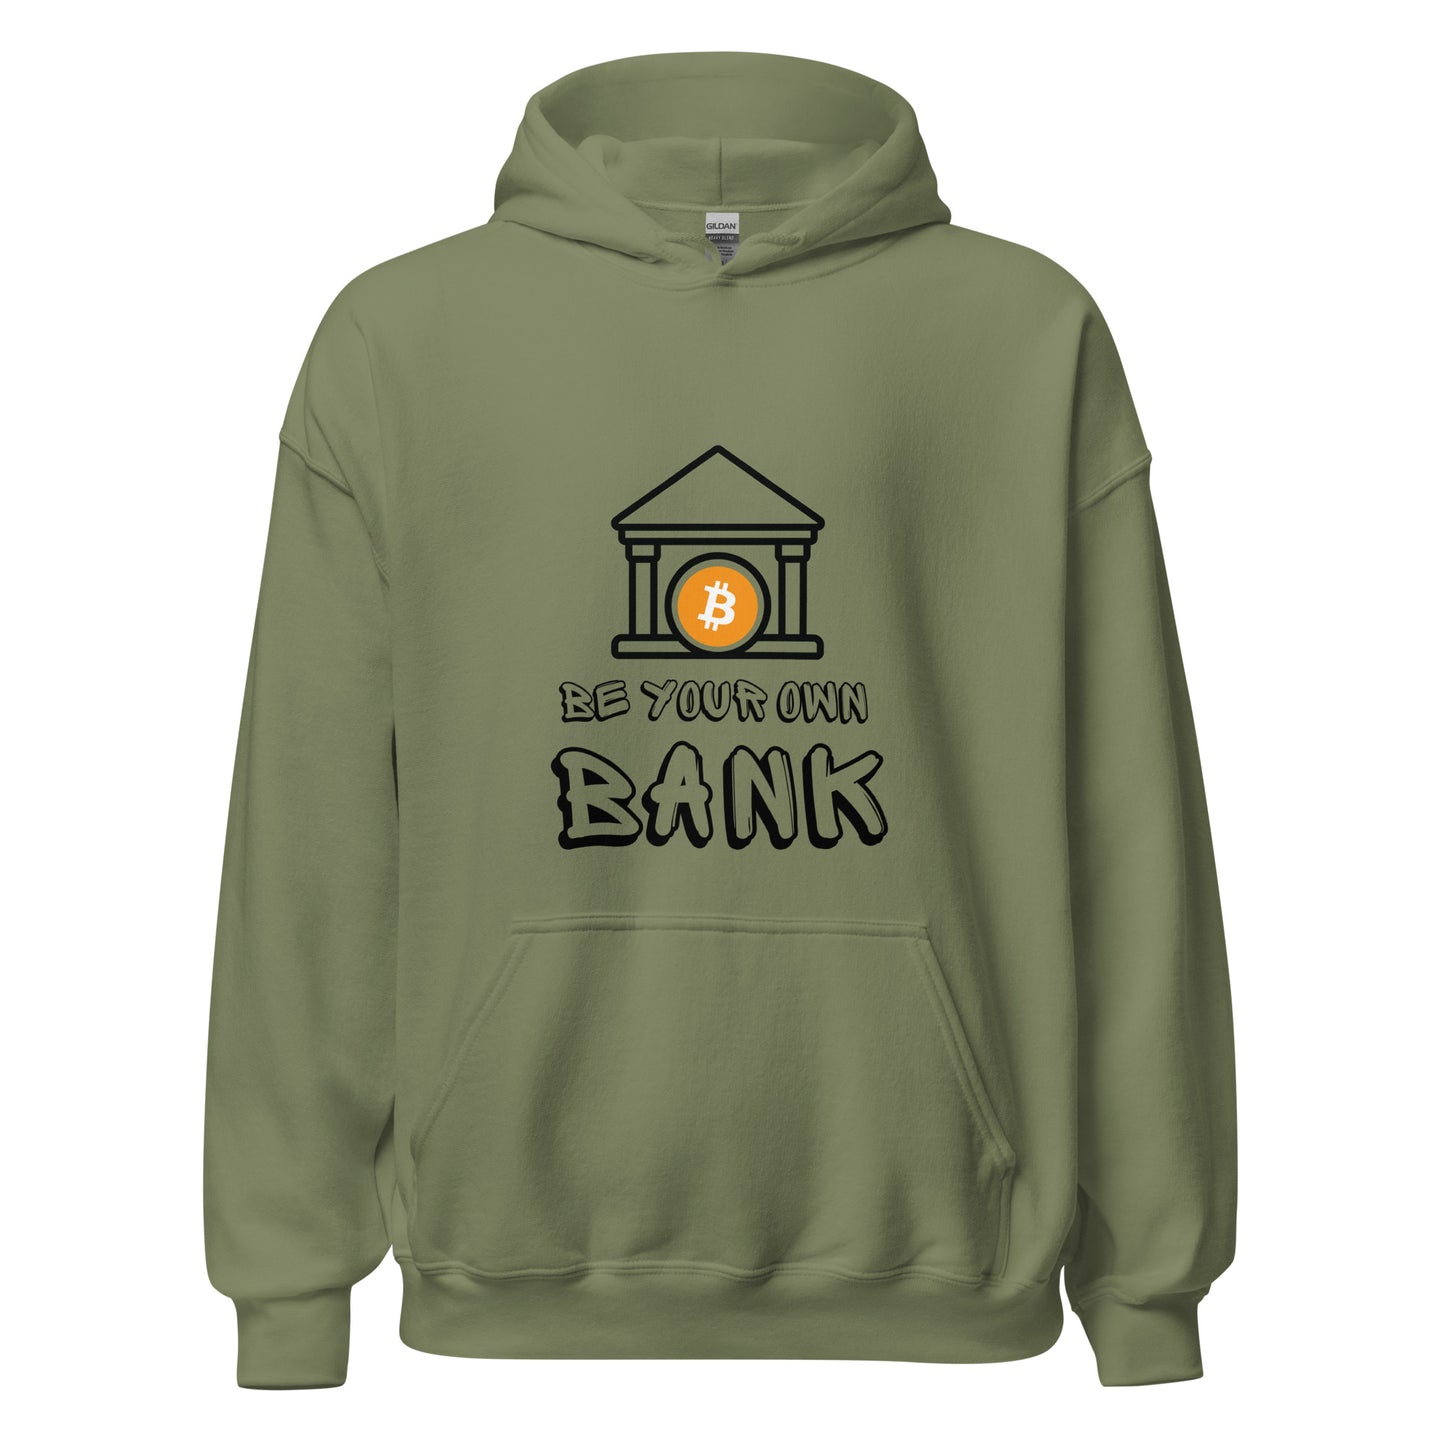 Be your own bank Unisex Hoodie